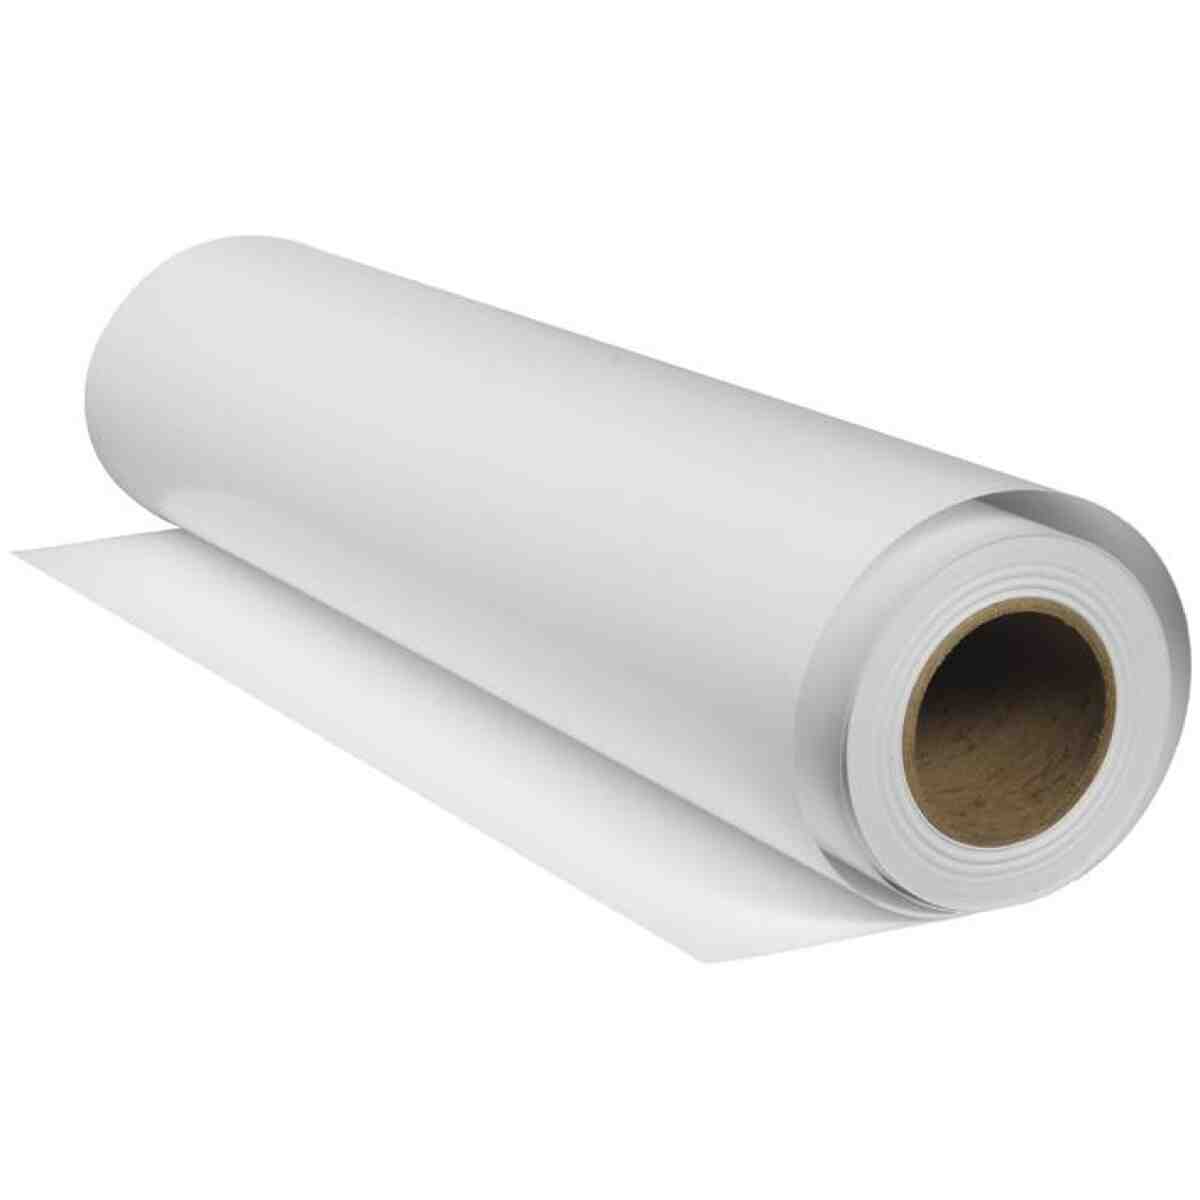 Direct To Film (DTF) Hot Peel Transfer Film 13" by 328' TOTAL INK SOLUTIONS®